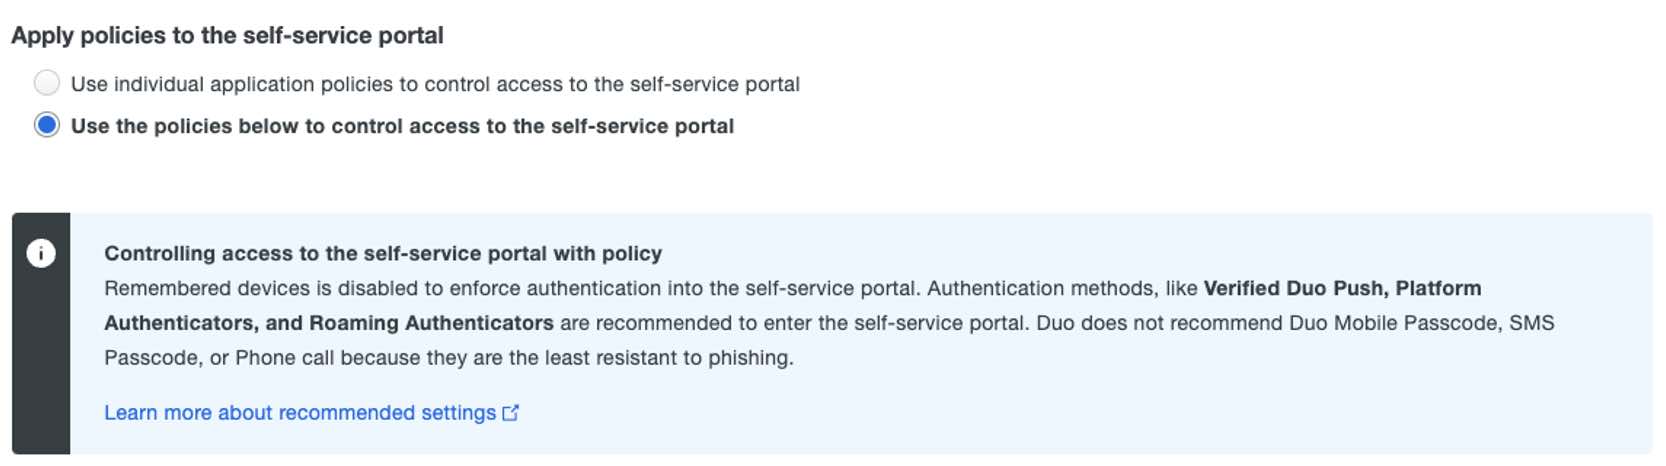 Screenshot of the policy application screen for the self-service portal